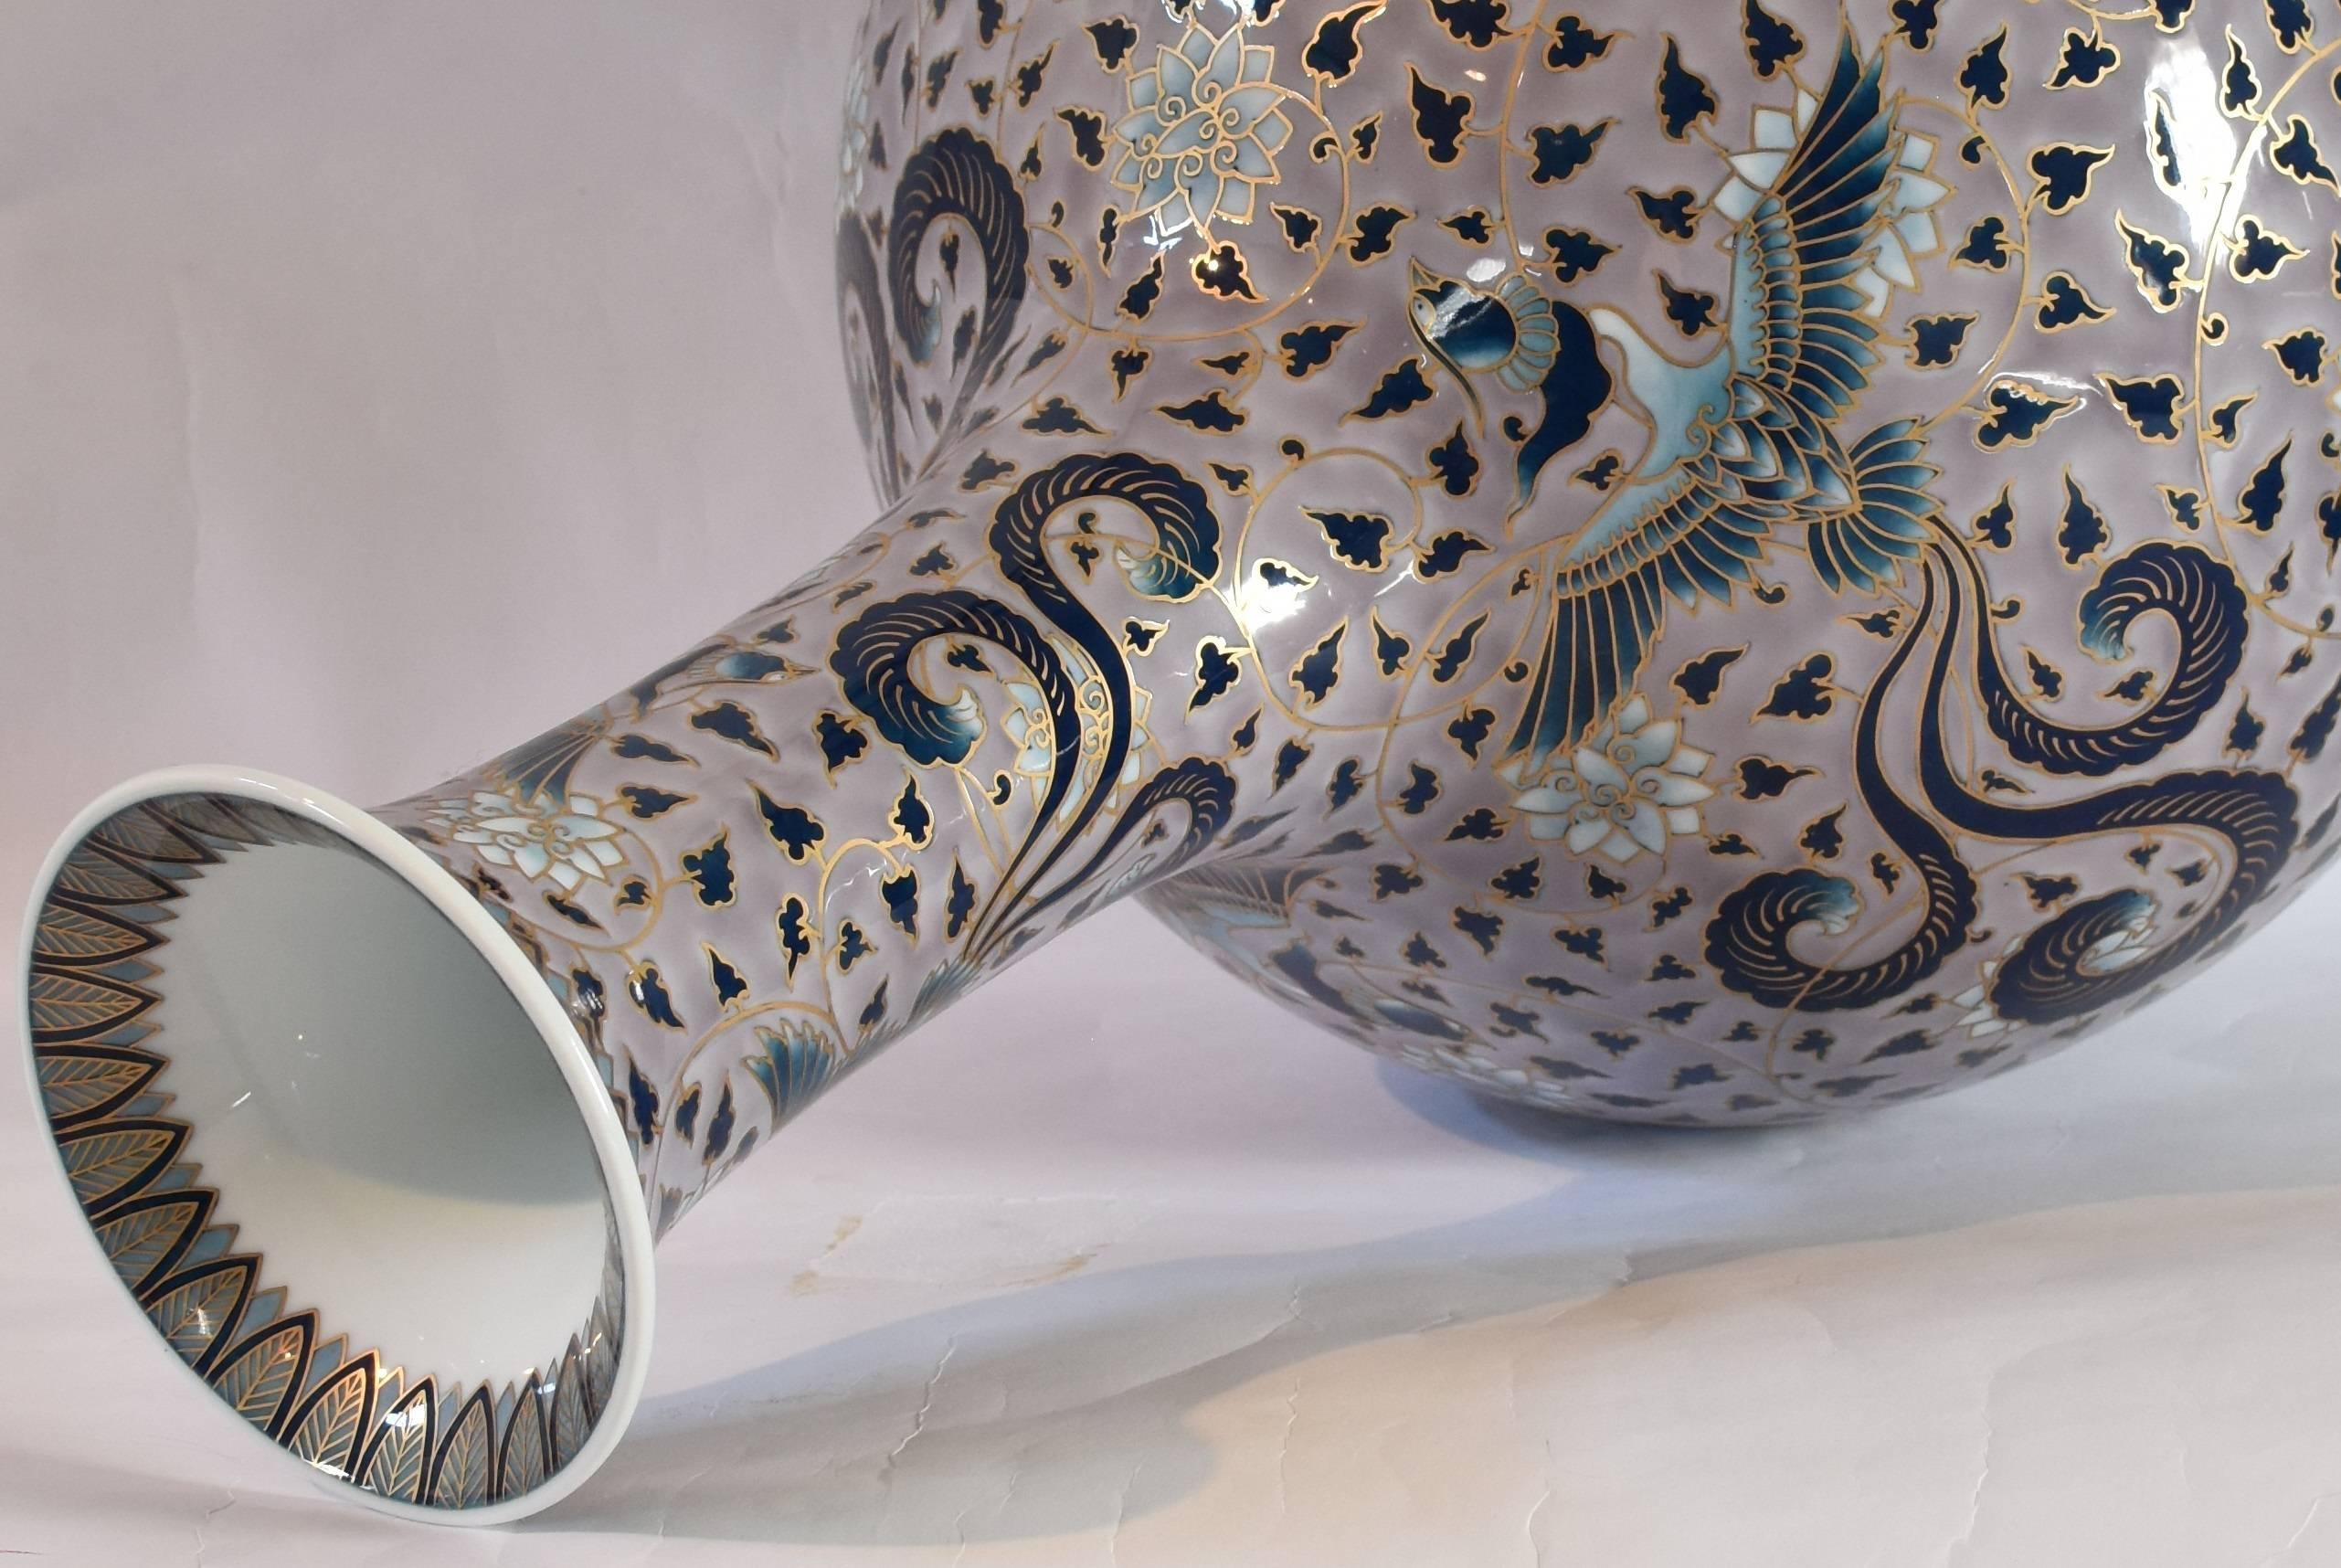 Extraordinary massive contemporary Japanese porcelain vase, extremely intricately gilded and hand-painted on fine Arita porcelain in a stunning shape in purple-grey, a signed masterpiece by highly acclaimed and award-winning master ceramic artist in